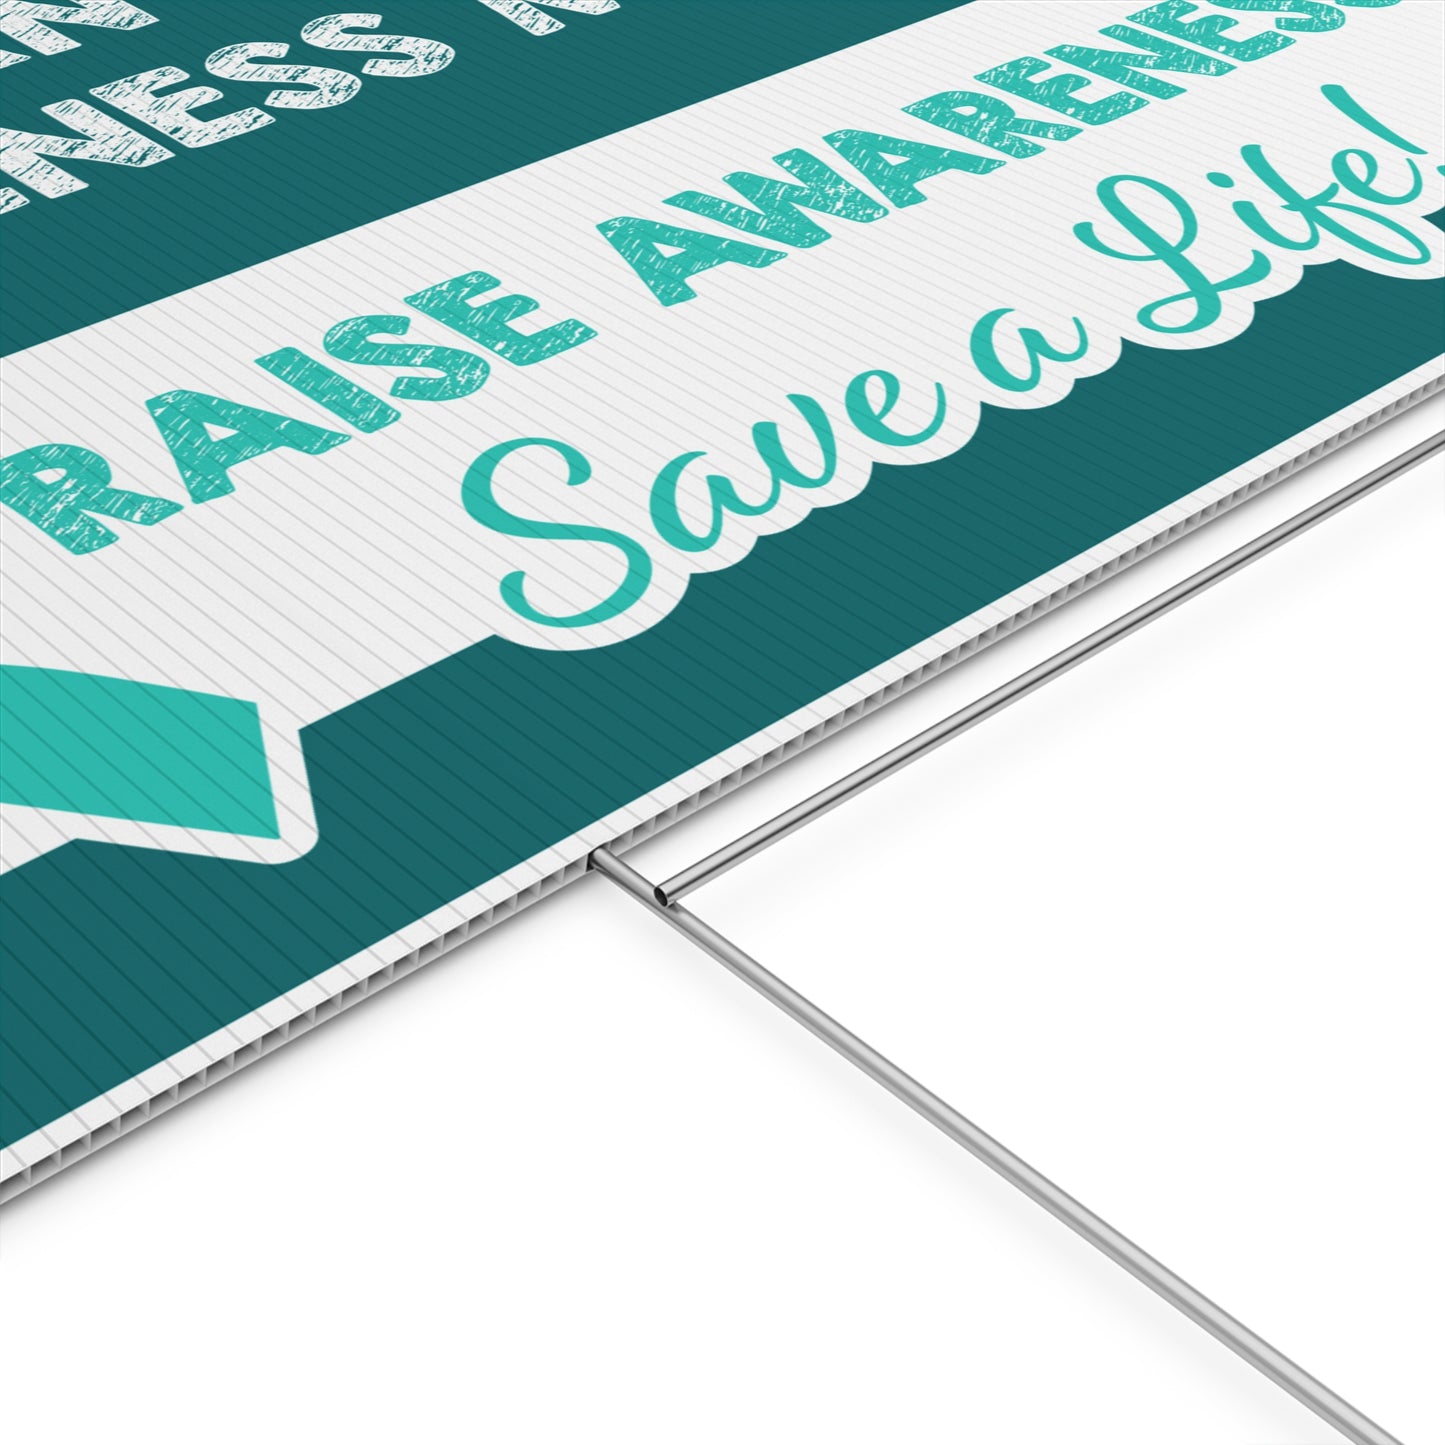 Ovarian Cancer Awareness Yard Sign, 18x12, 24x18, 36x24, H-Stake Included, v3